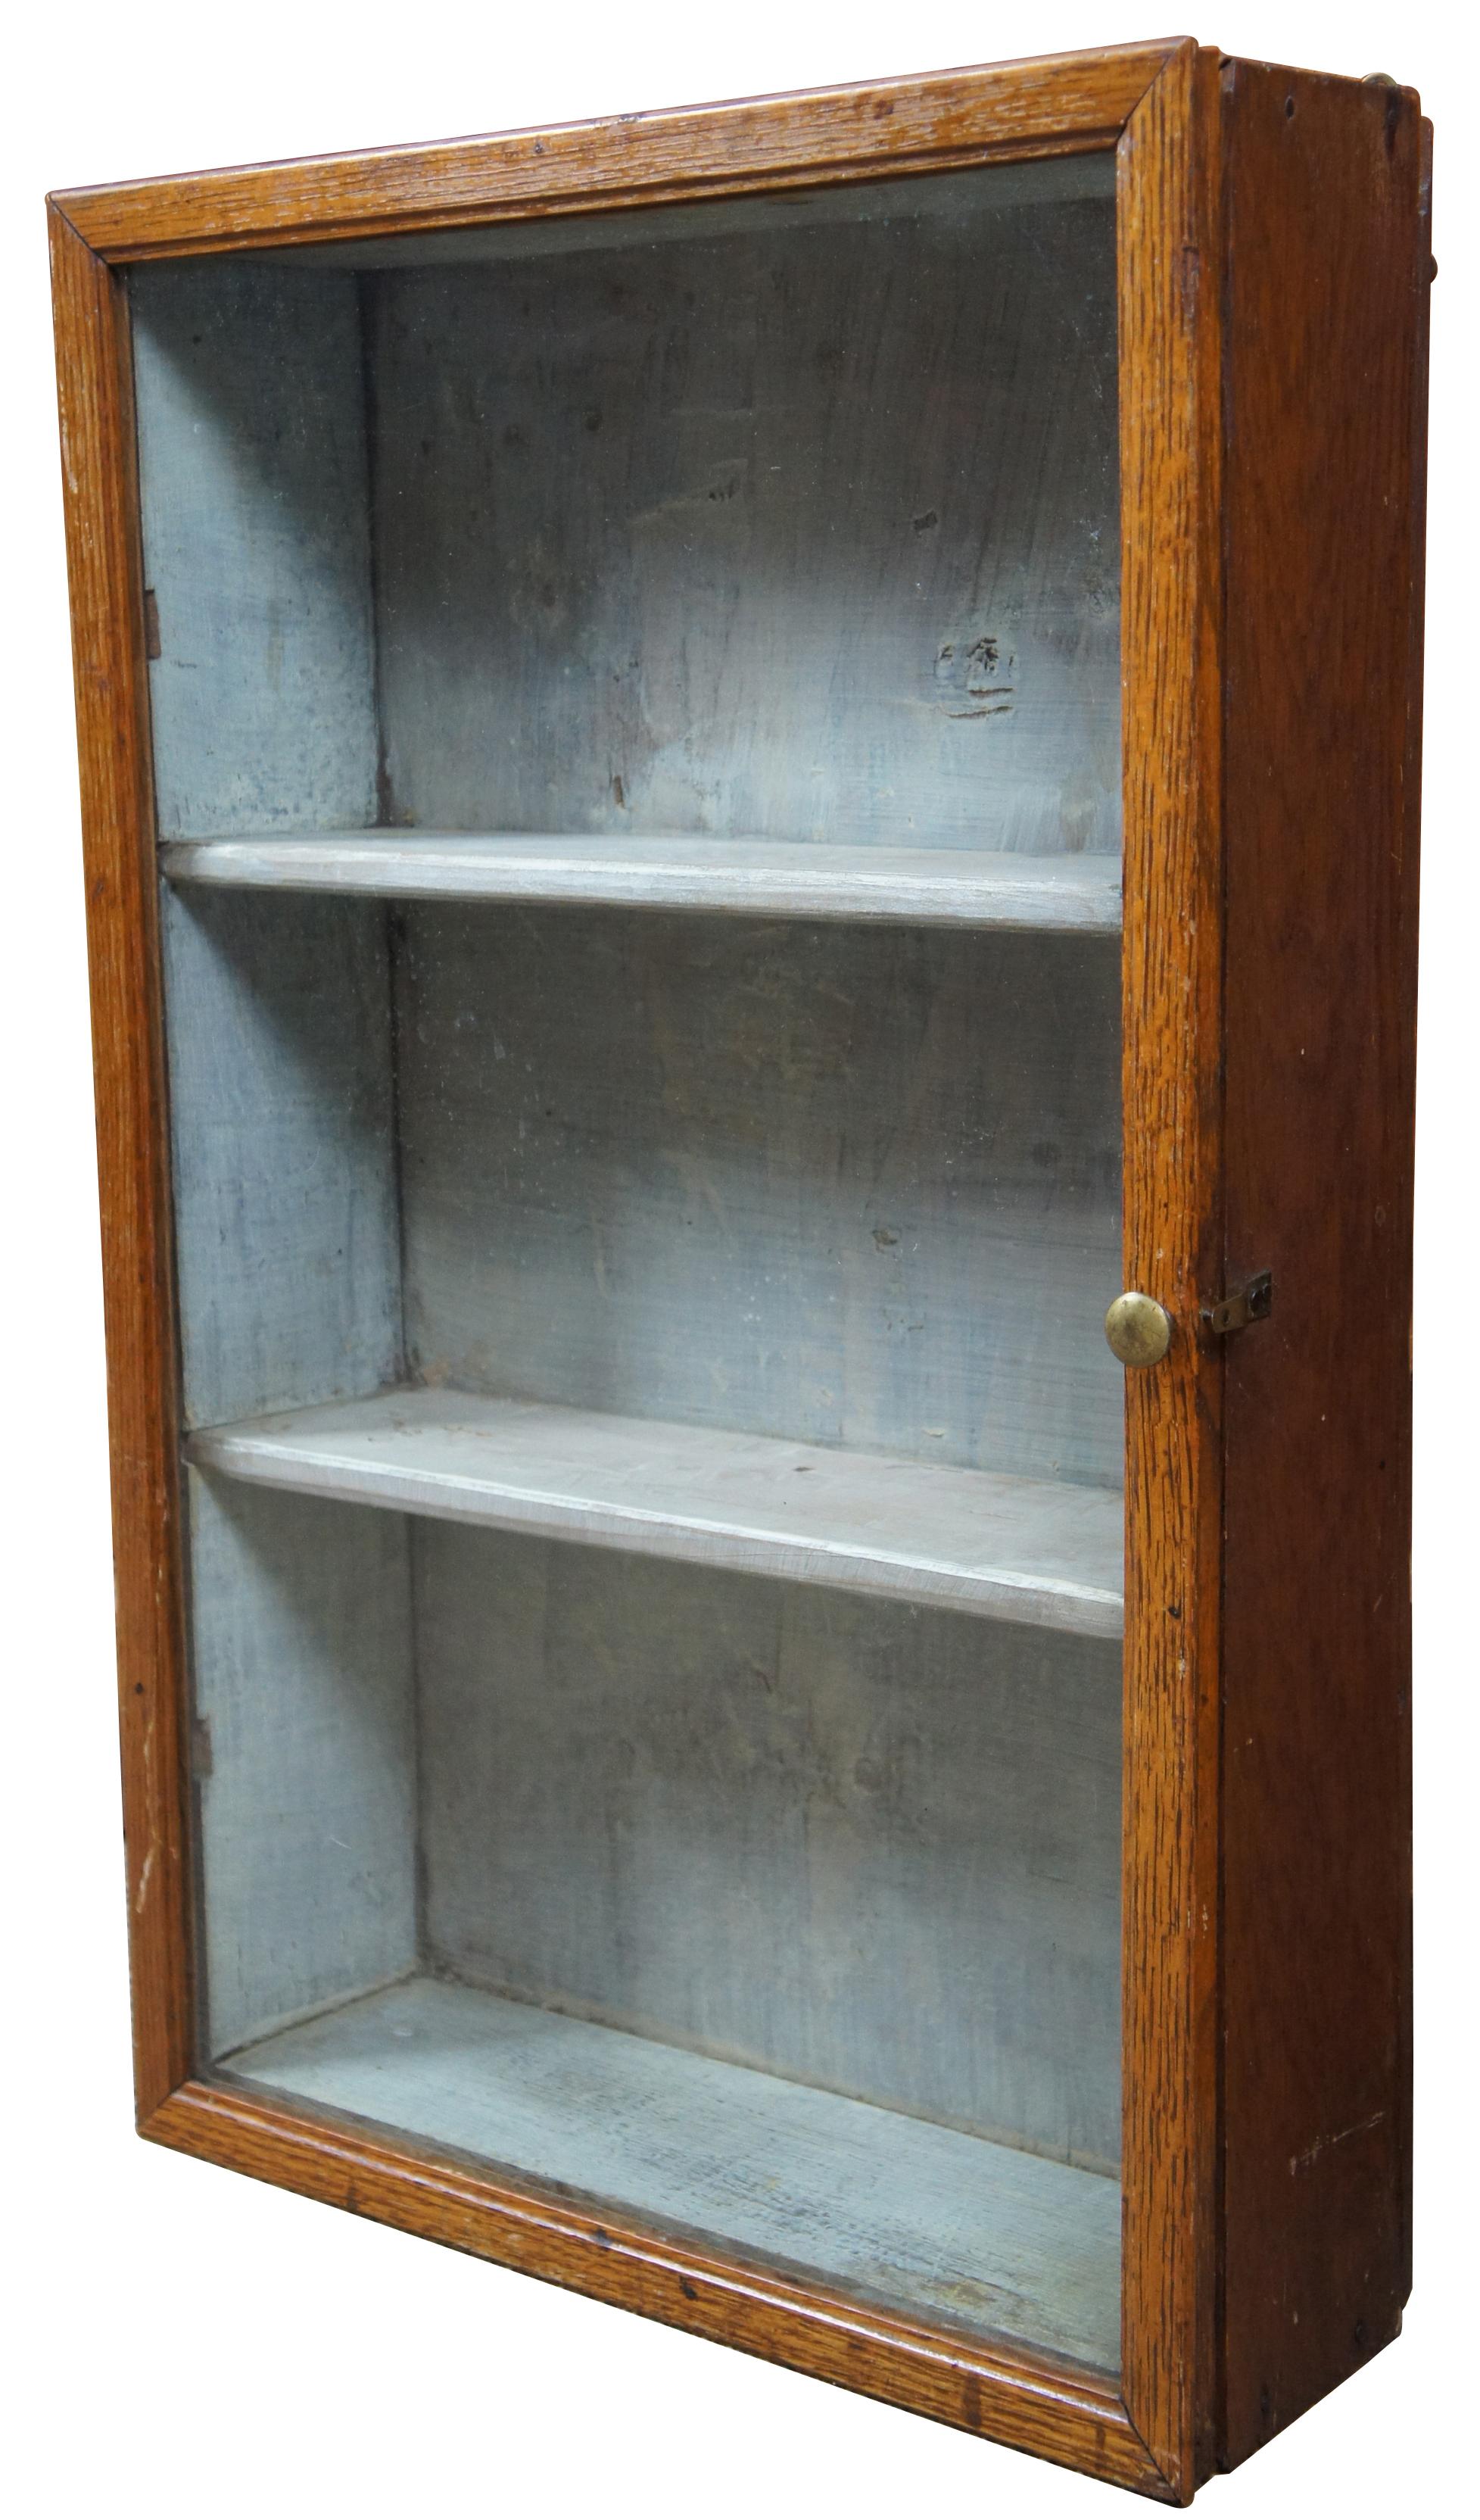 Antique wall hanging cabinet with glass front, three shelves and pale blue painted interior. Great for a bathroom nook or display of any collectibles.
 